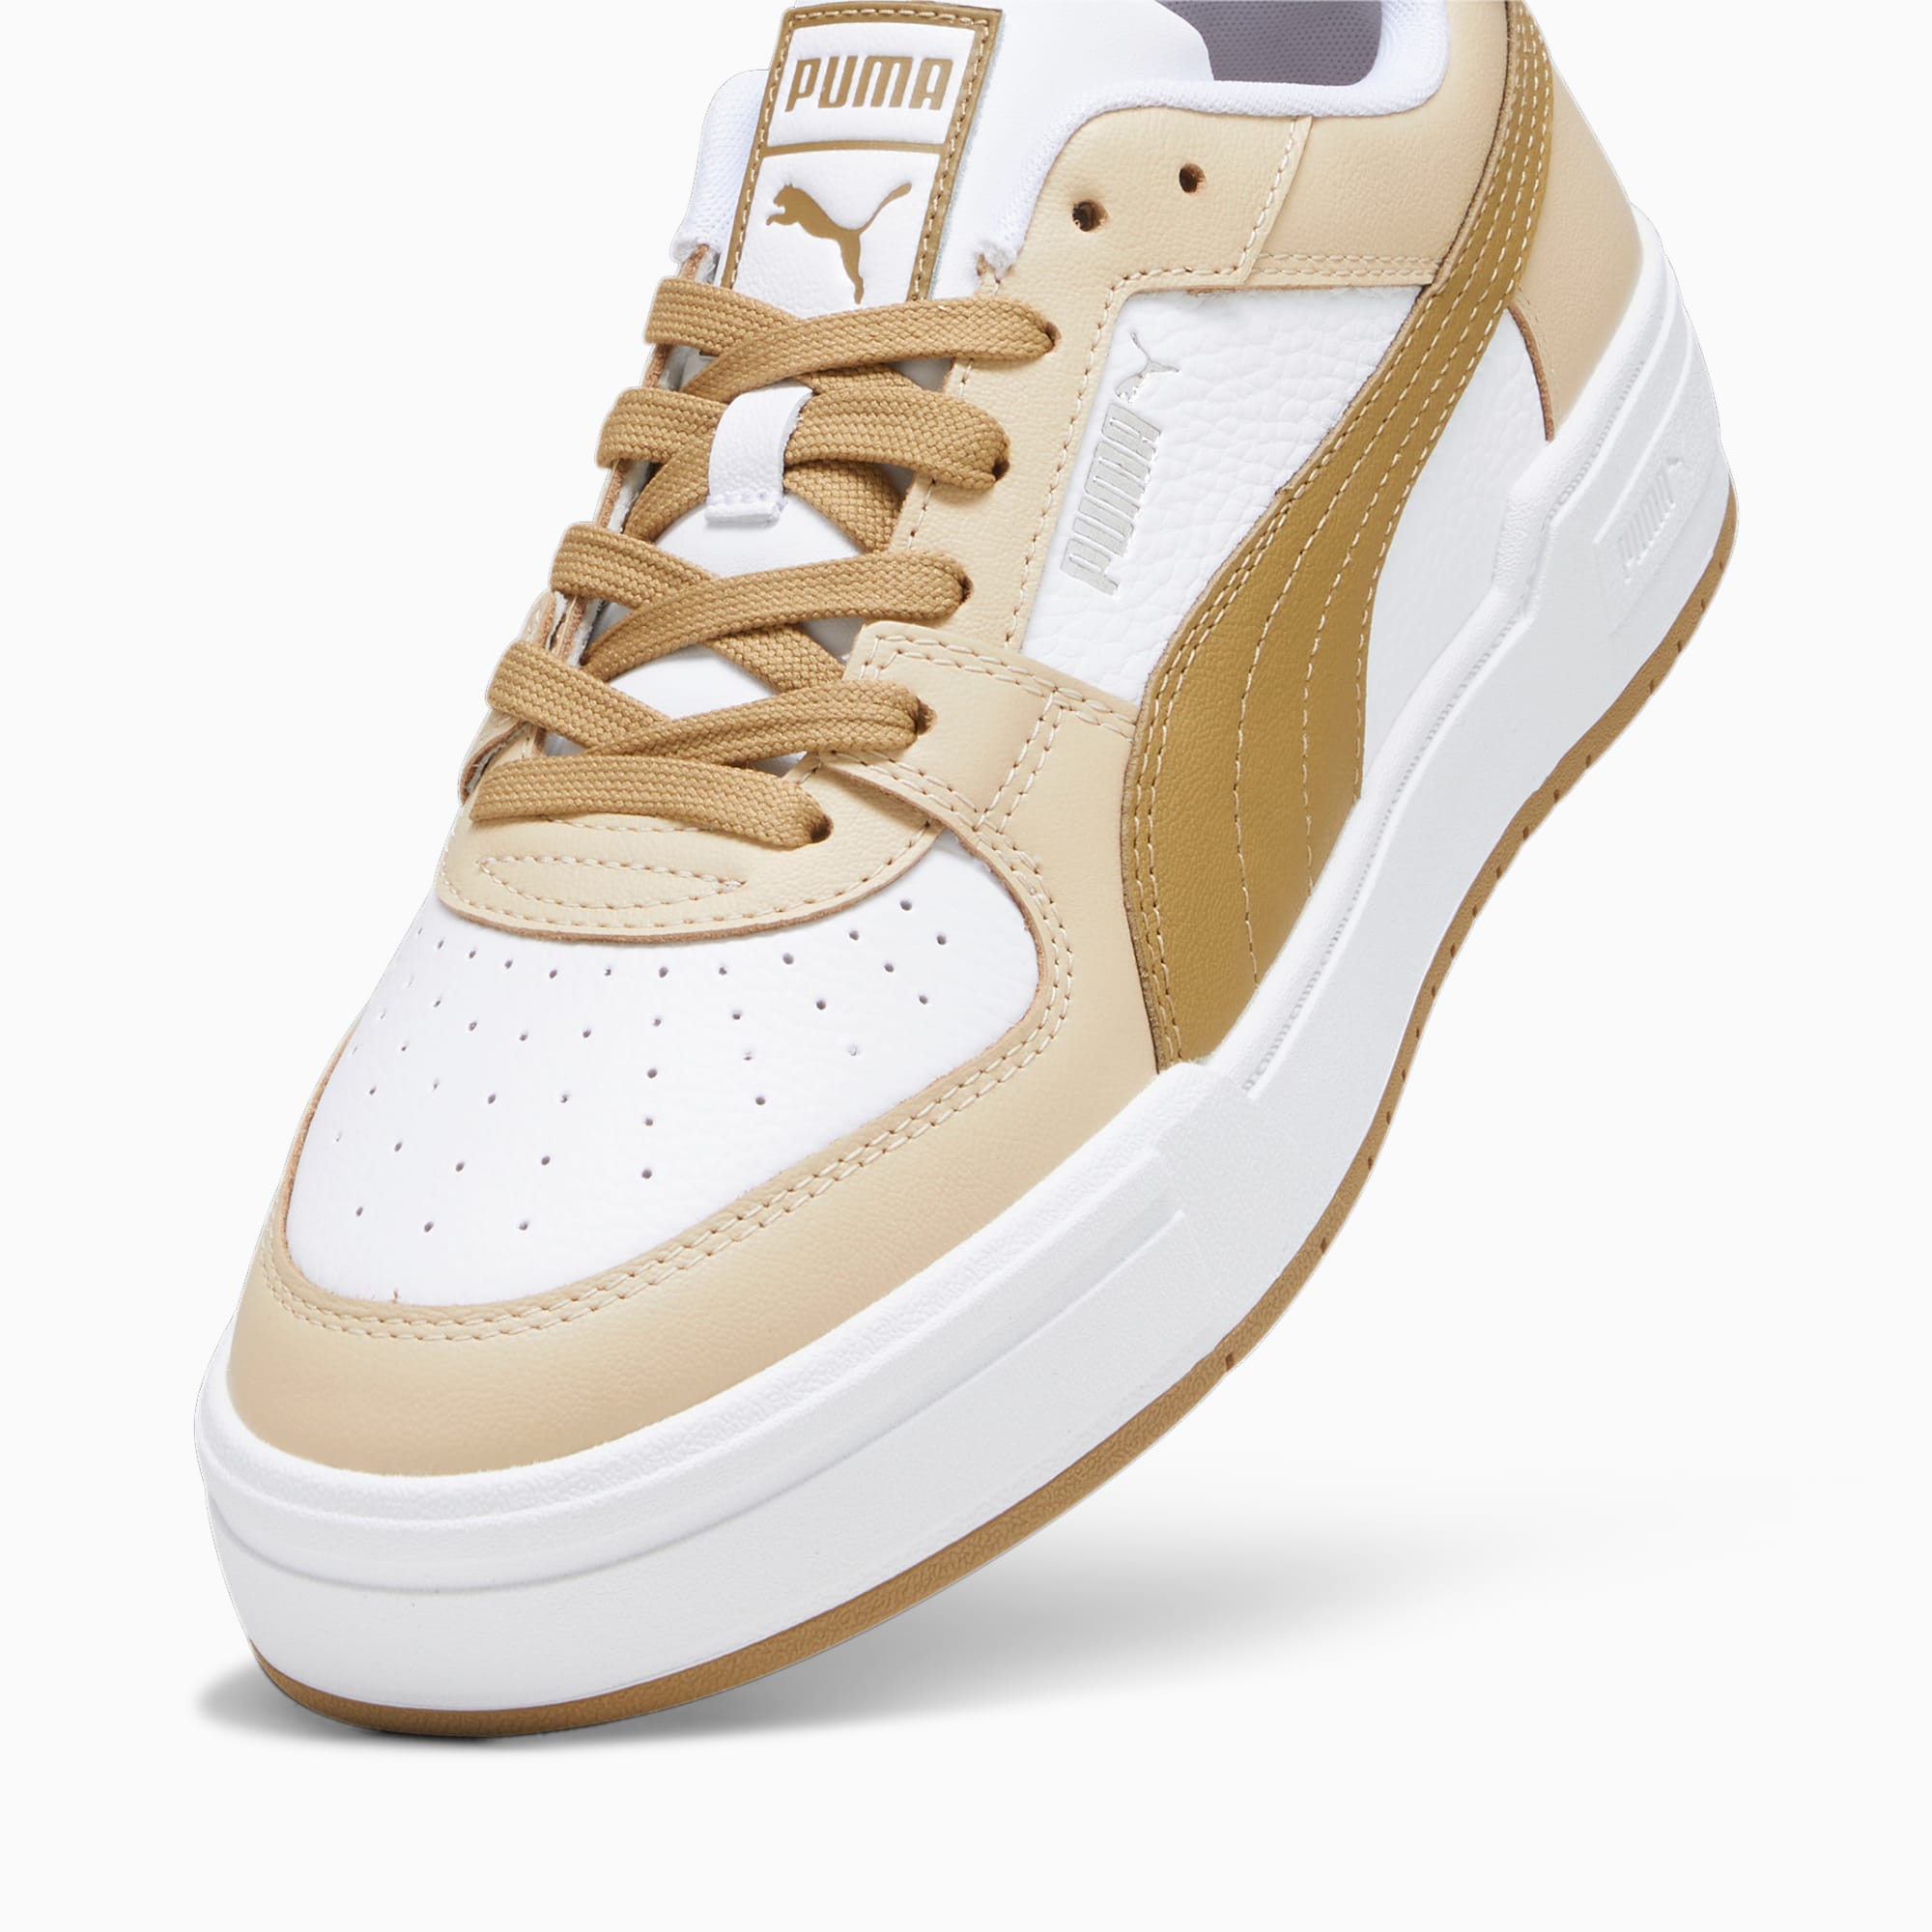 Women's PUMA Ca Pro Classic Trainers, White/Granola/Toasted, Size 37, Shoes